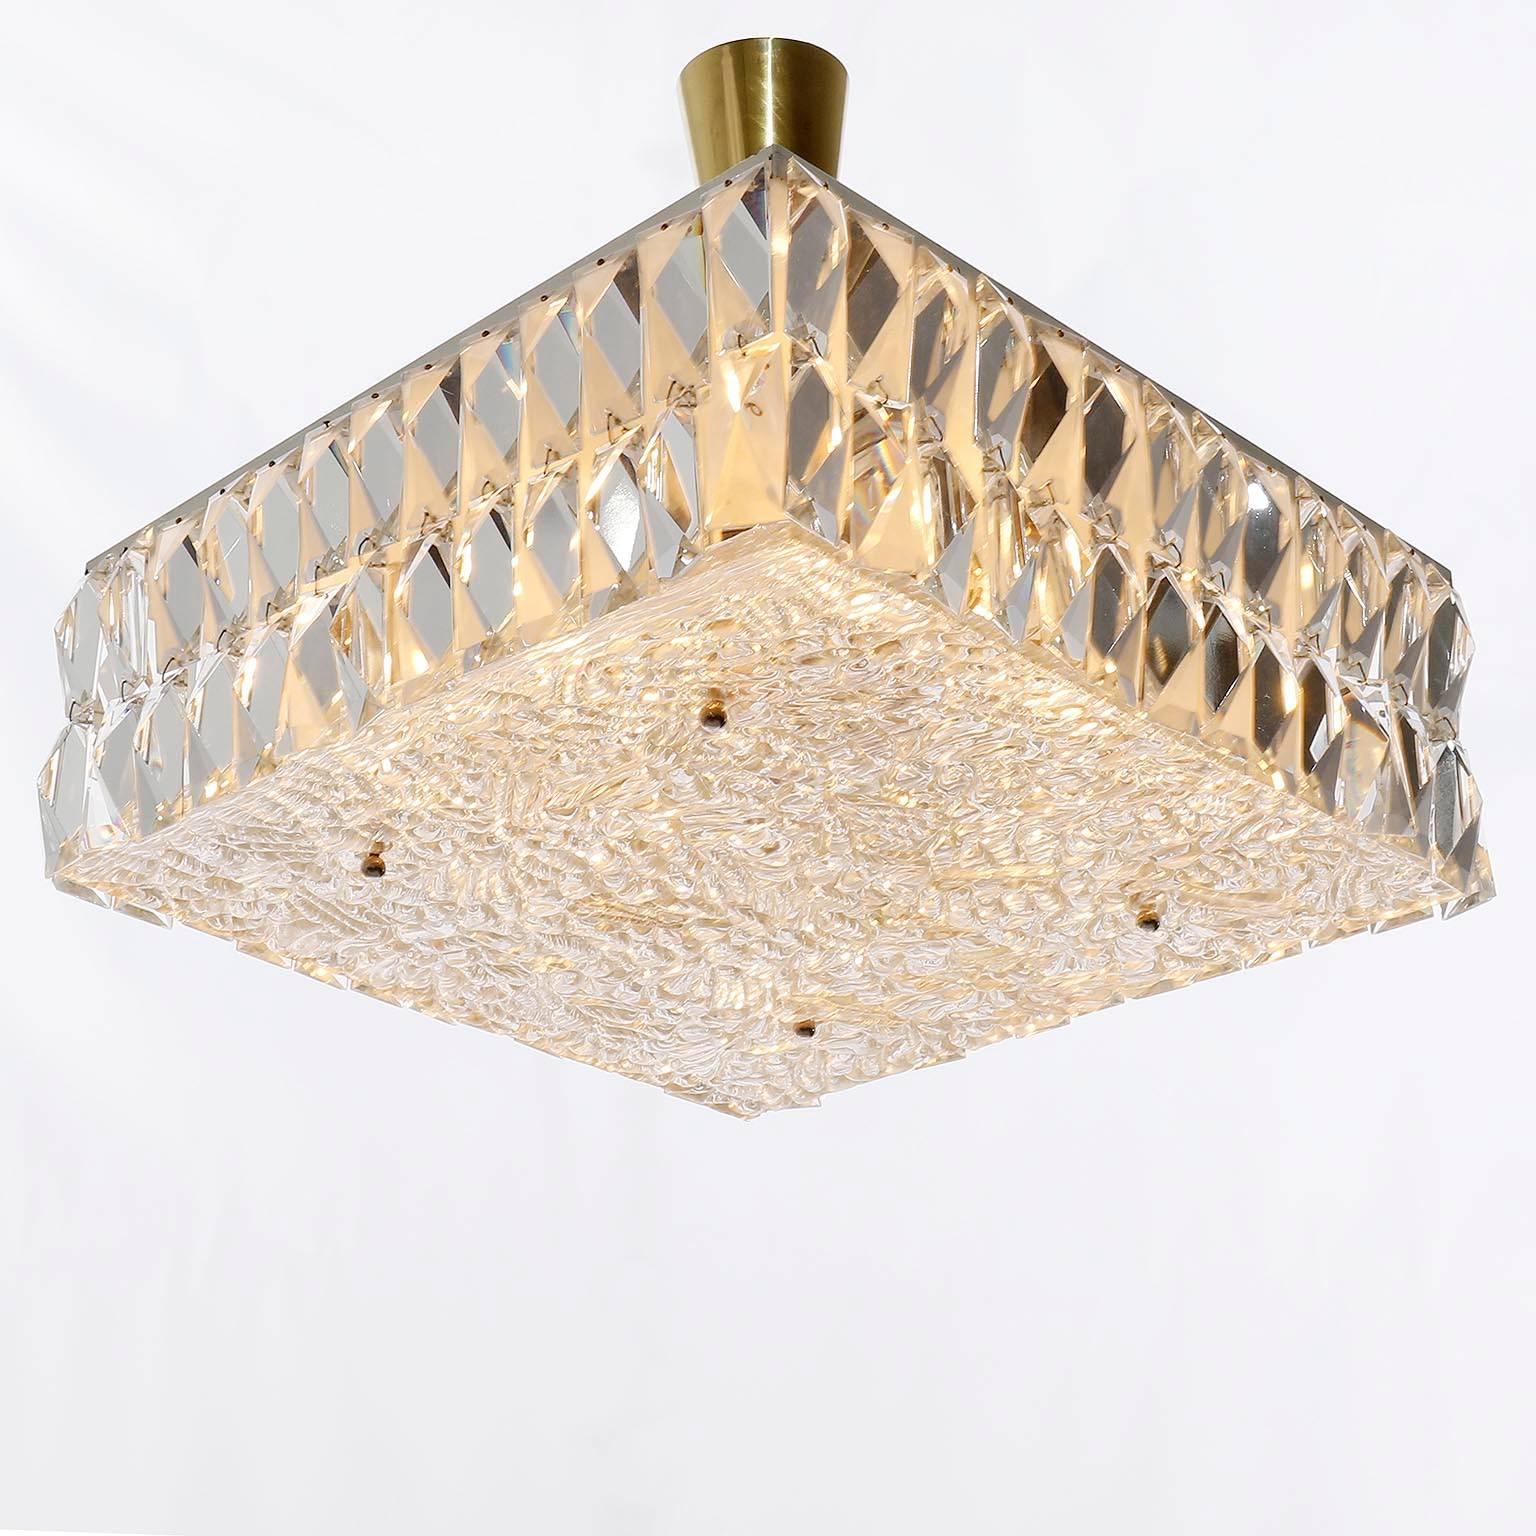 Square Kalmar Light Fixture, Textured and Crystal Glass, 1960s, One of Two (Geschliffenes Glas)